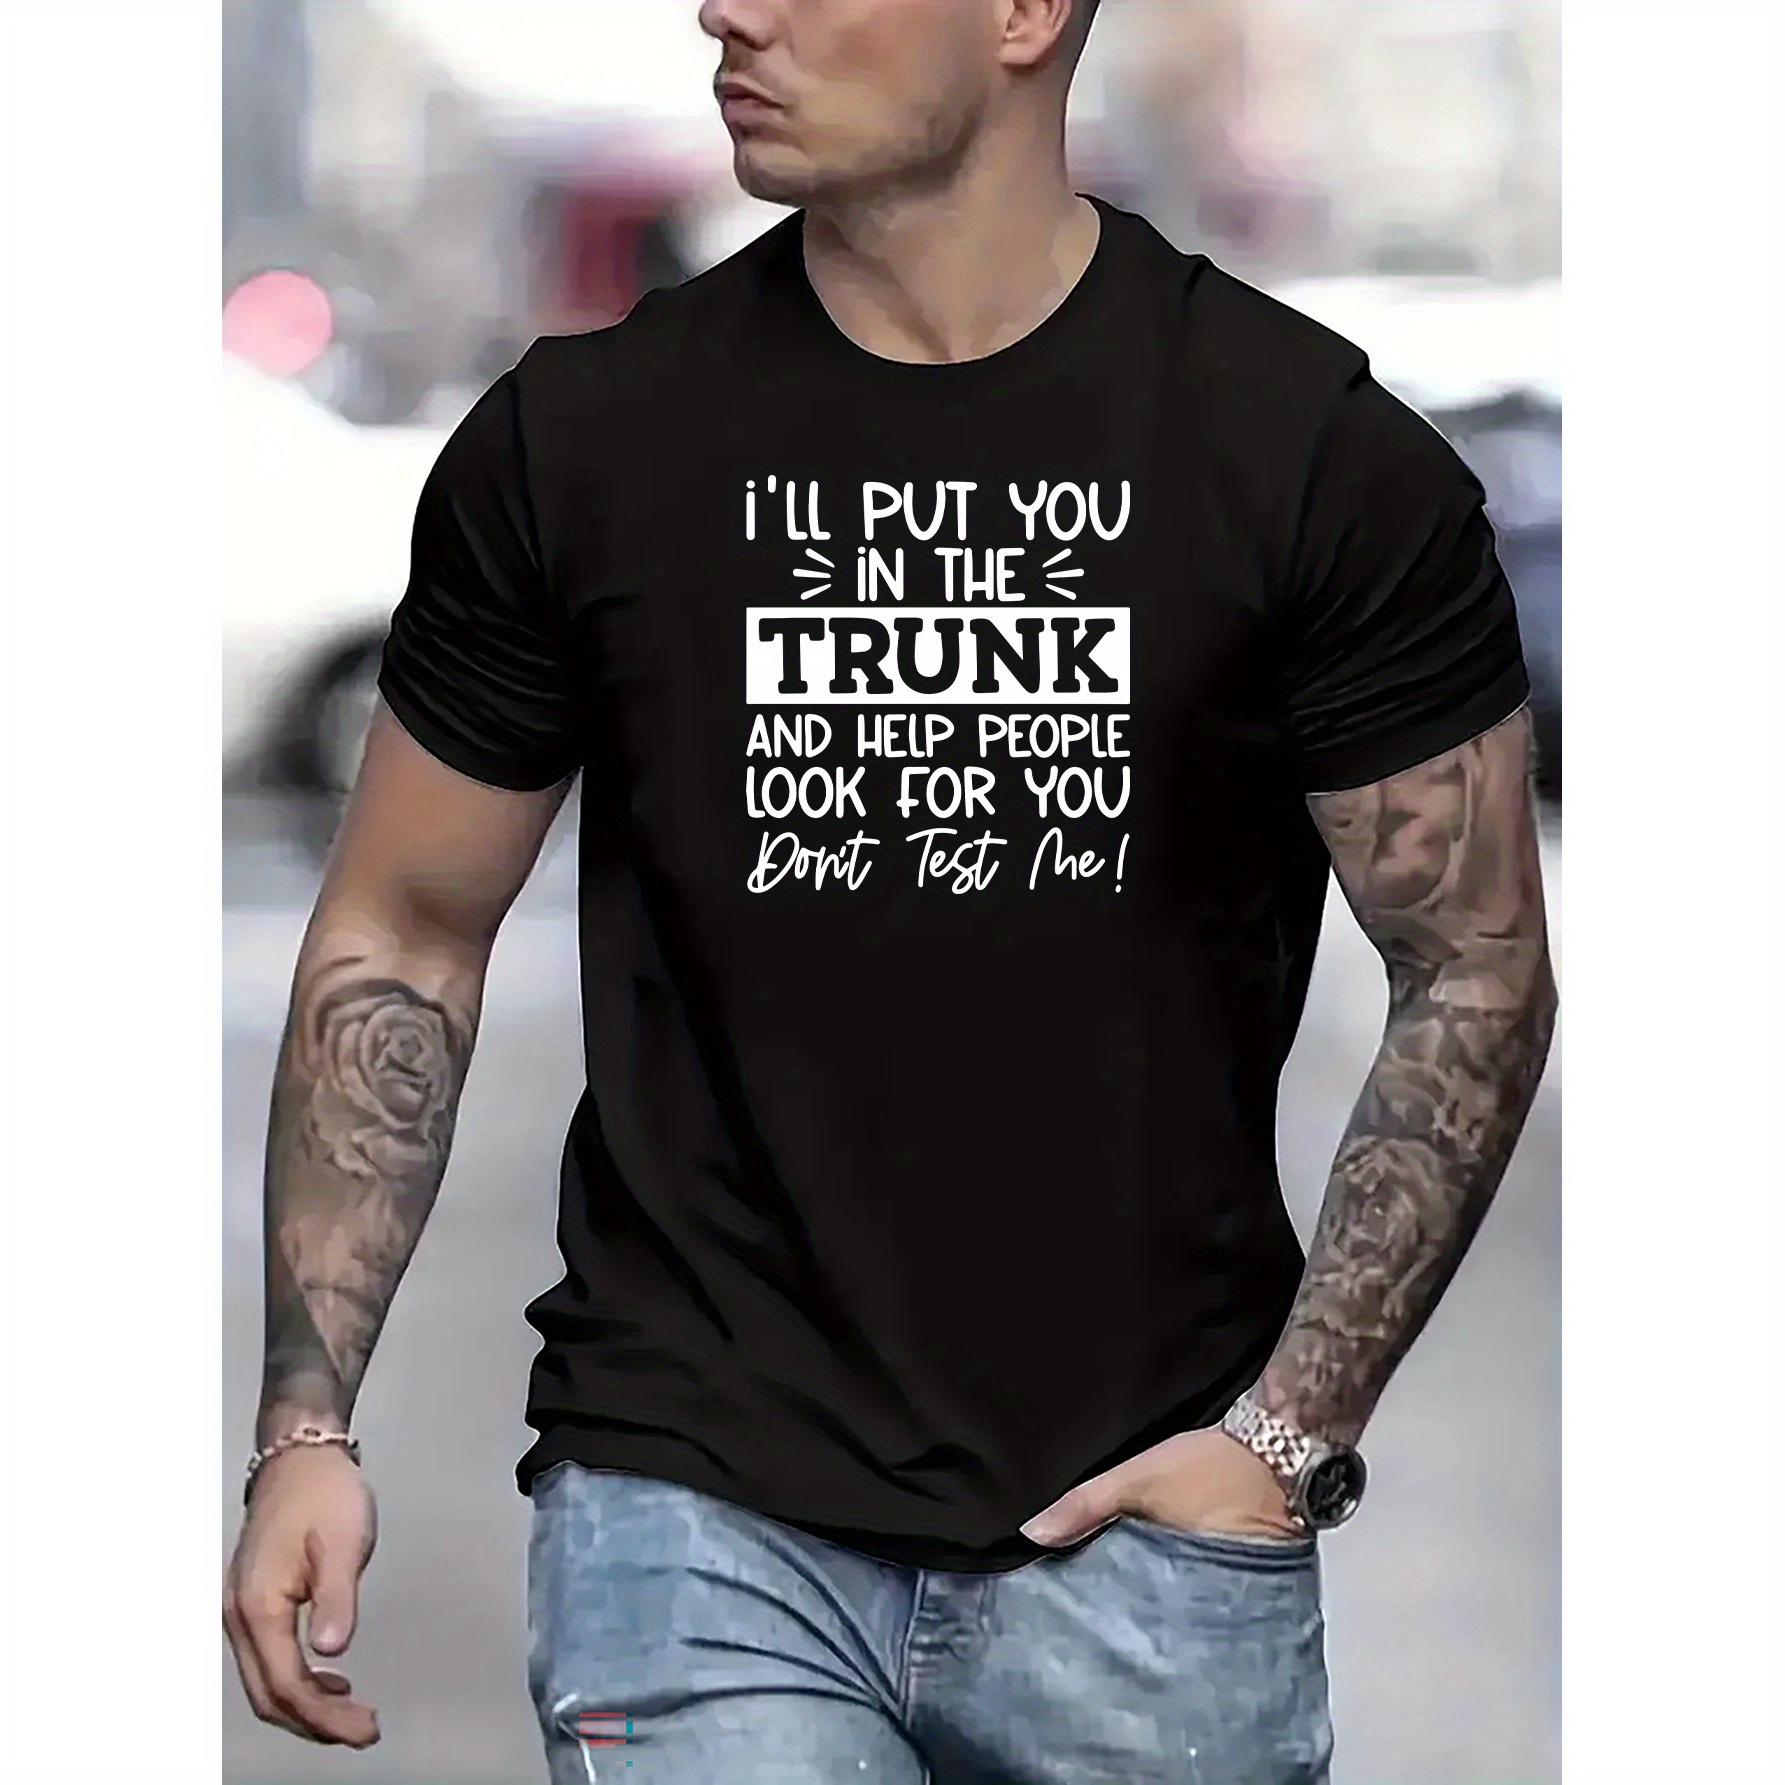 

I'll Put You In The Trunk... Print, Men's Novel Graphic Design T-shirt, Casual Comfy Tees For Summer, Men's Clothing Tops For Daily Activities